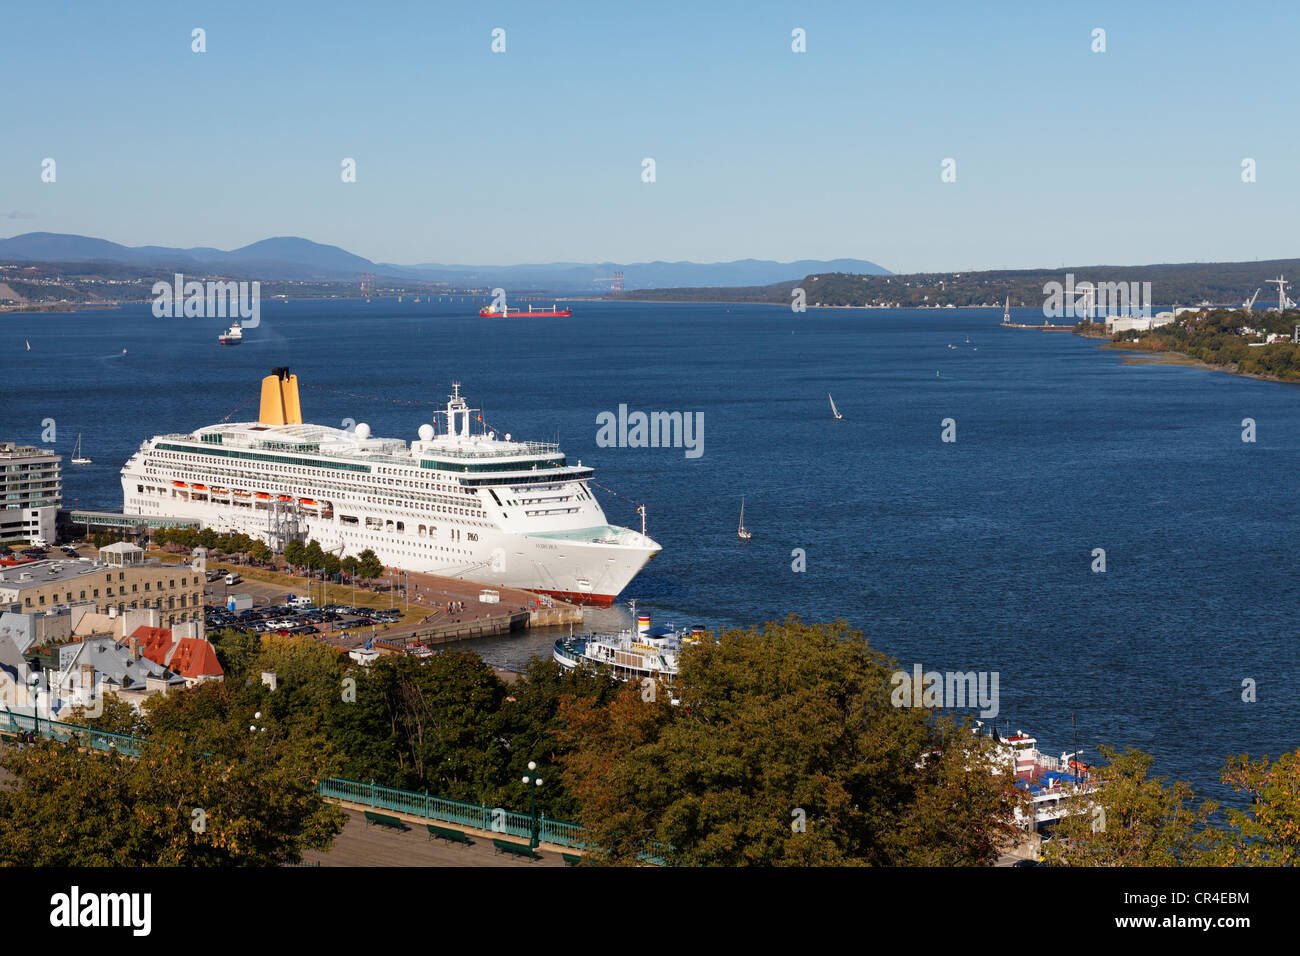 Cruise ship, port district of Quebec City, St Lawrence river, Quebec, Canada Stock Photo